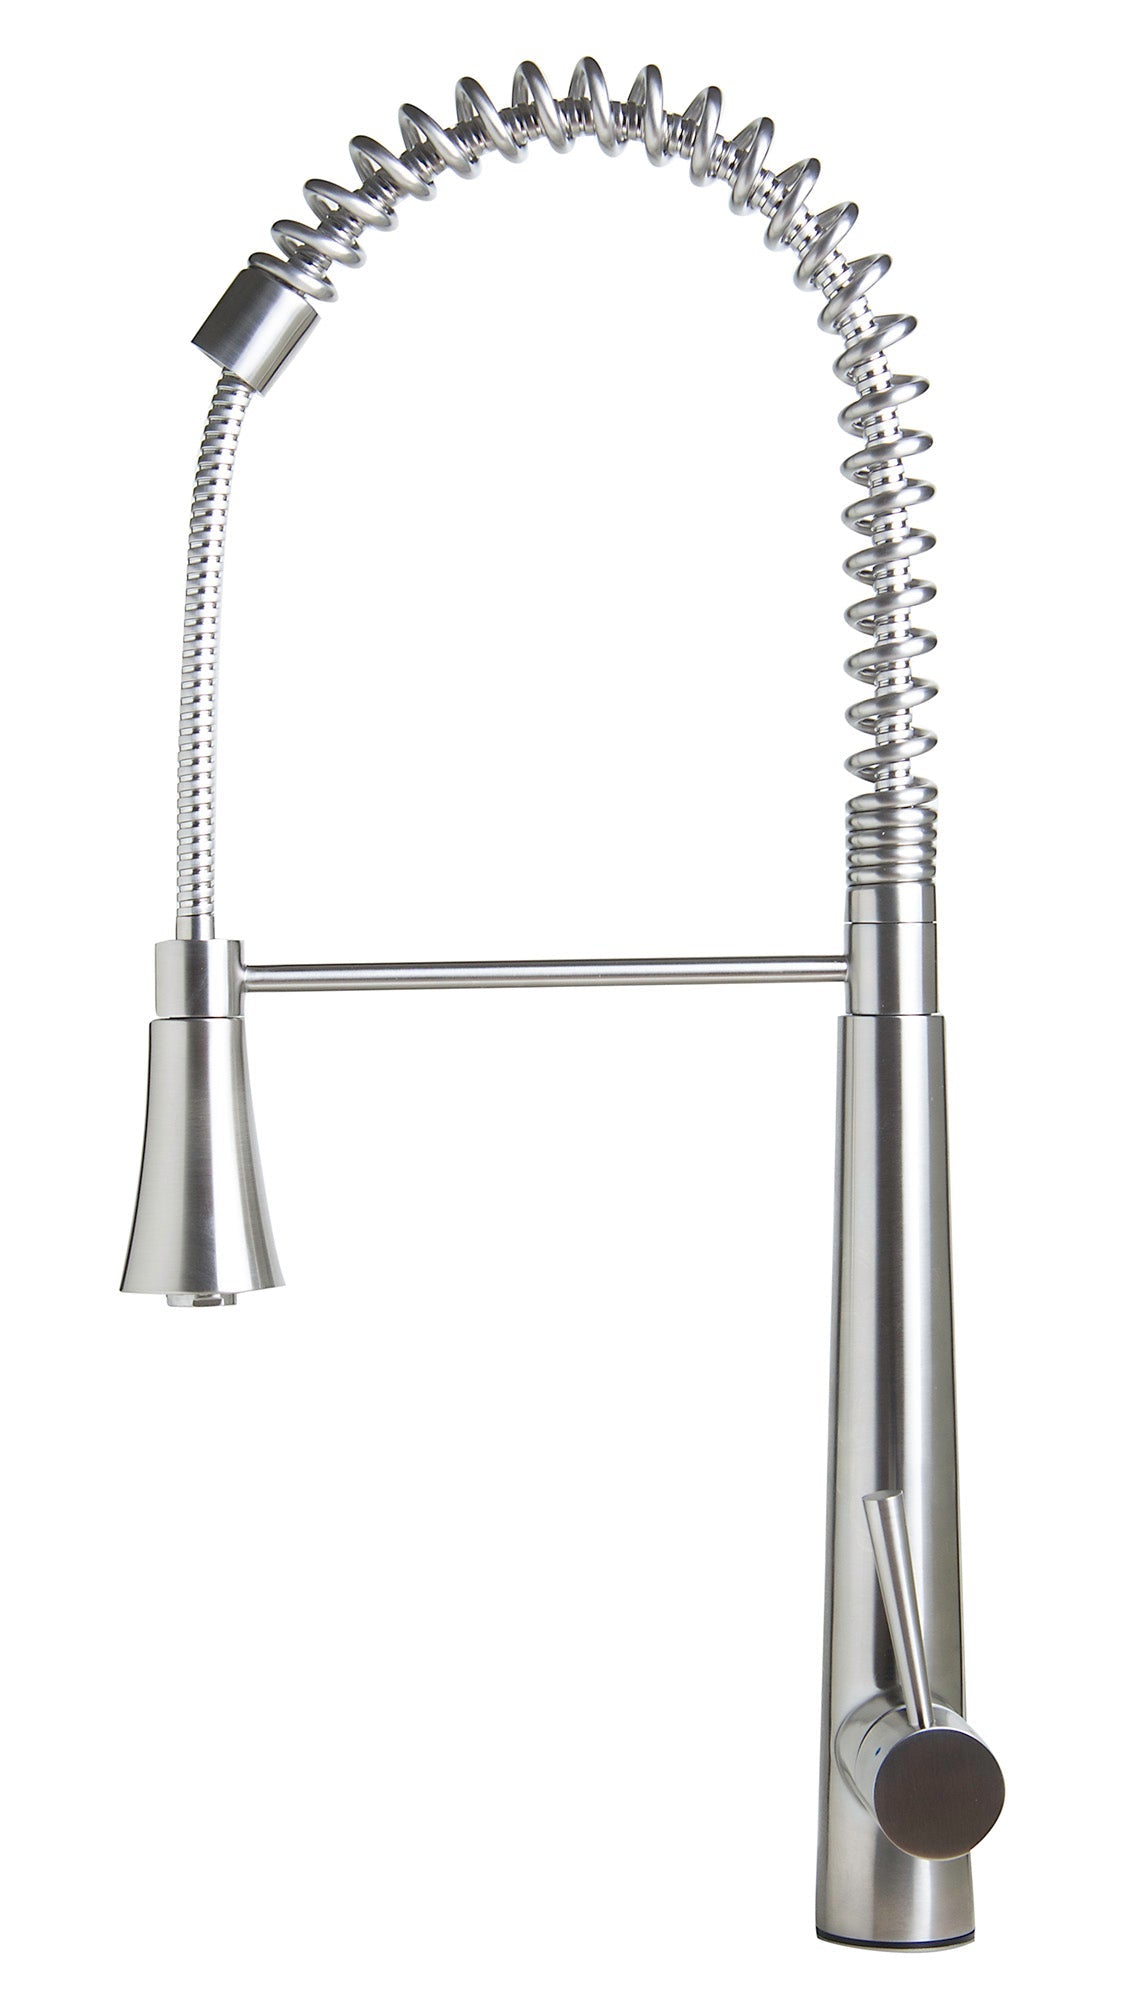 Alfi brand AB2039S Solid Stainless Steel Commercial Spring Kitchen Faucet with Pull Down Shower Spray